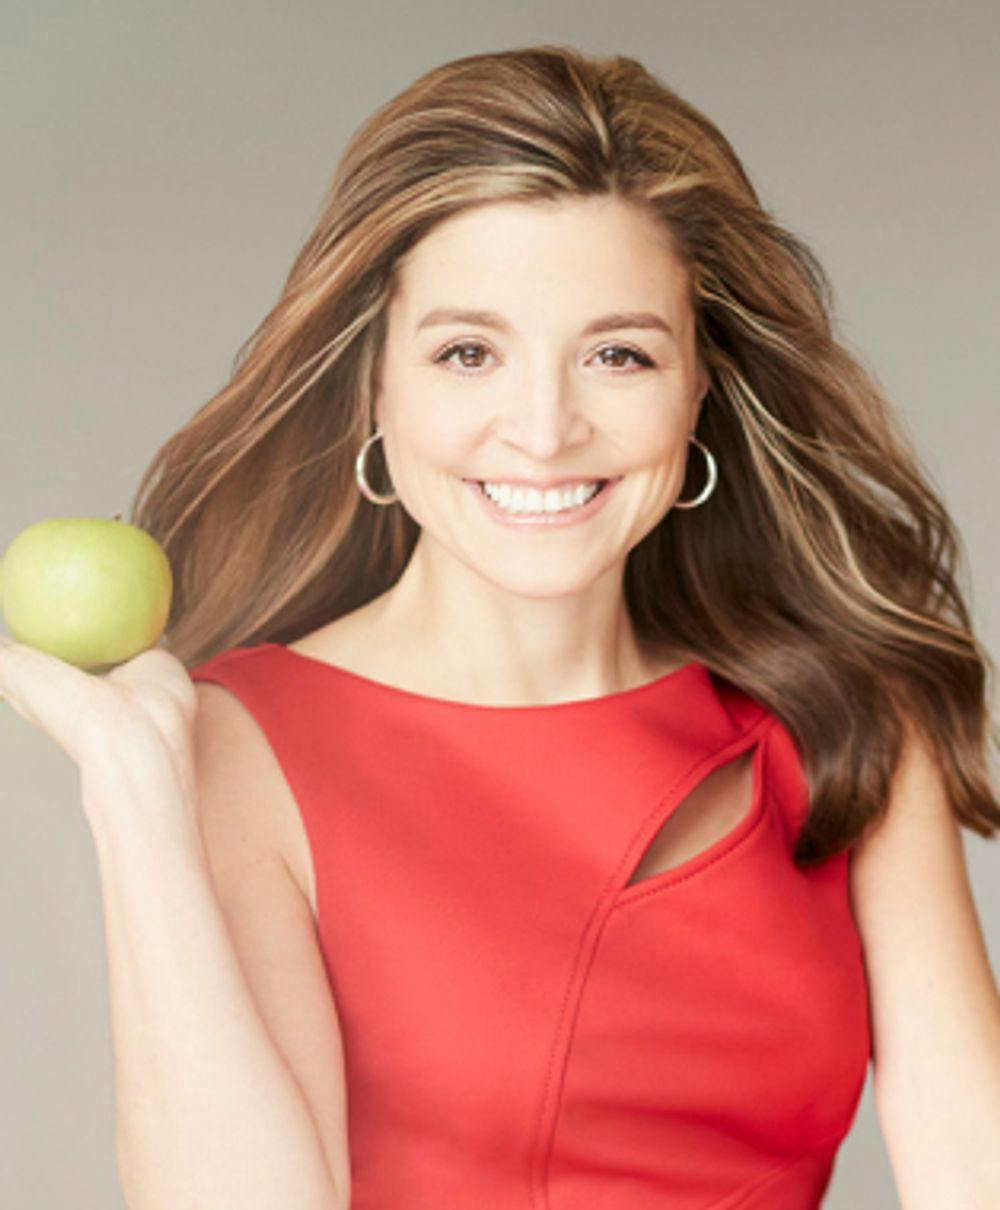 Susan Albers - Dr. Susan Albers' mission is to offer practical, easy mindful eating tools, based on proven science, so you have a peaceful, healthy relationship to food.